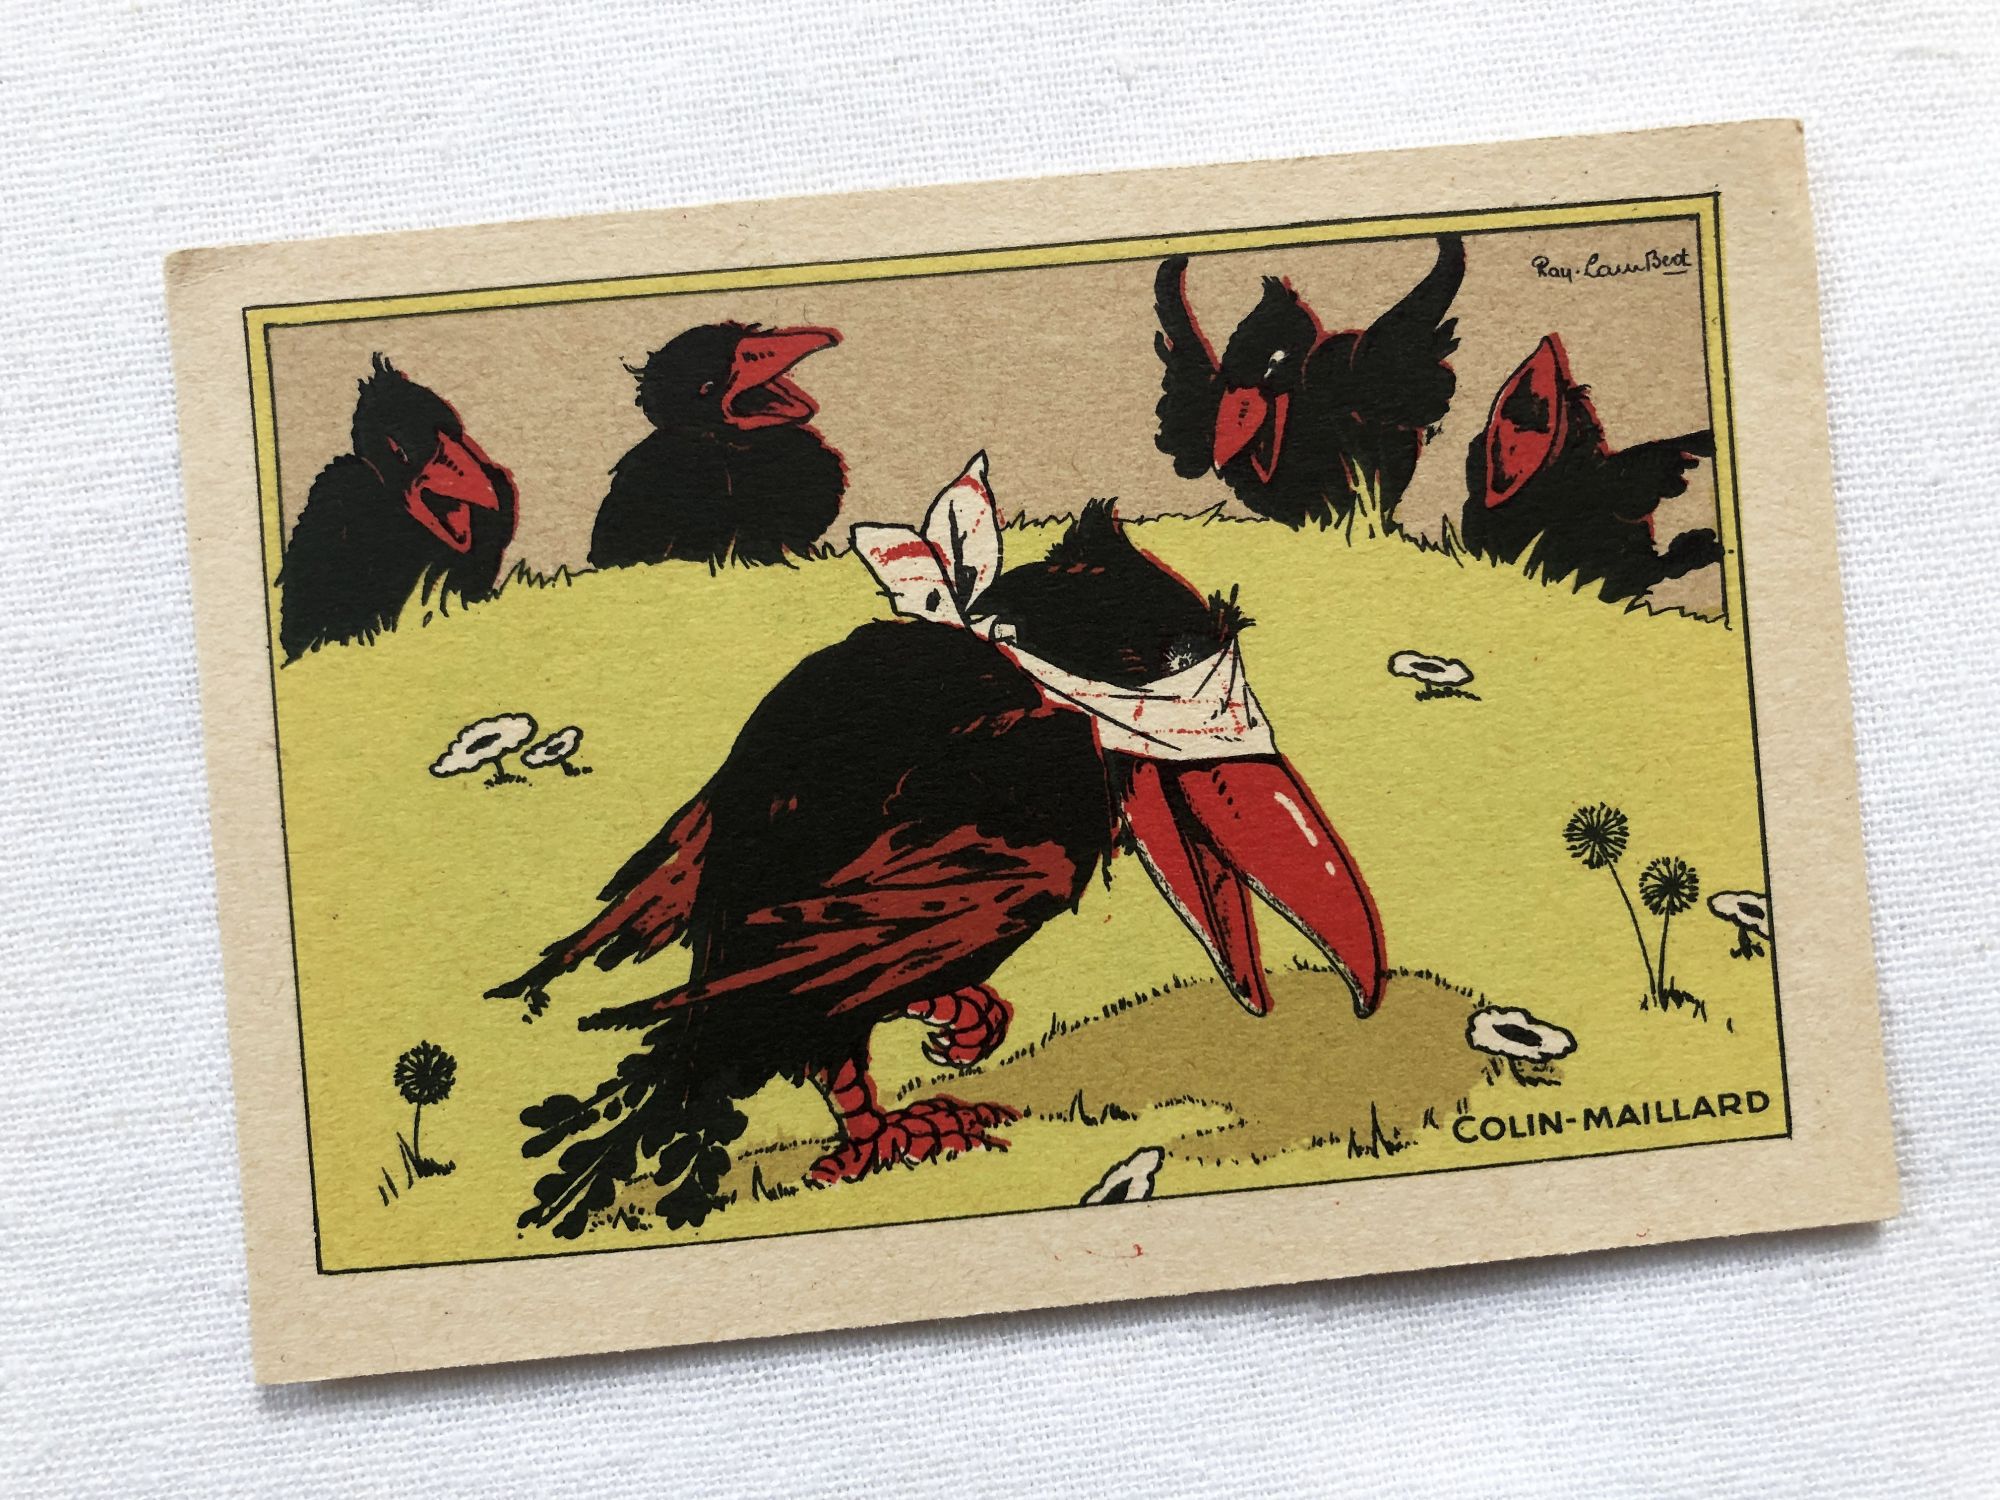 Vintage card for children by the French illustrator Ray-Lambert - "Colin-Maillard"